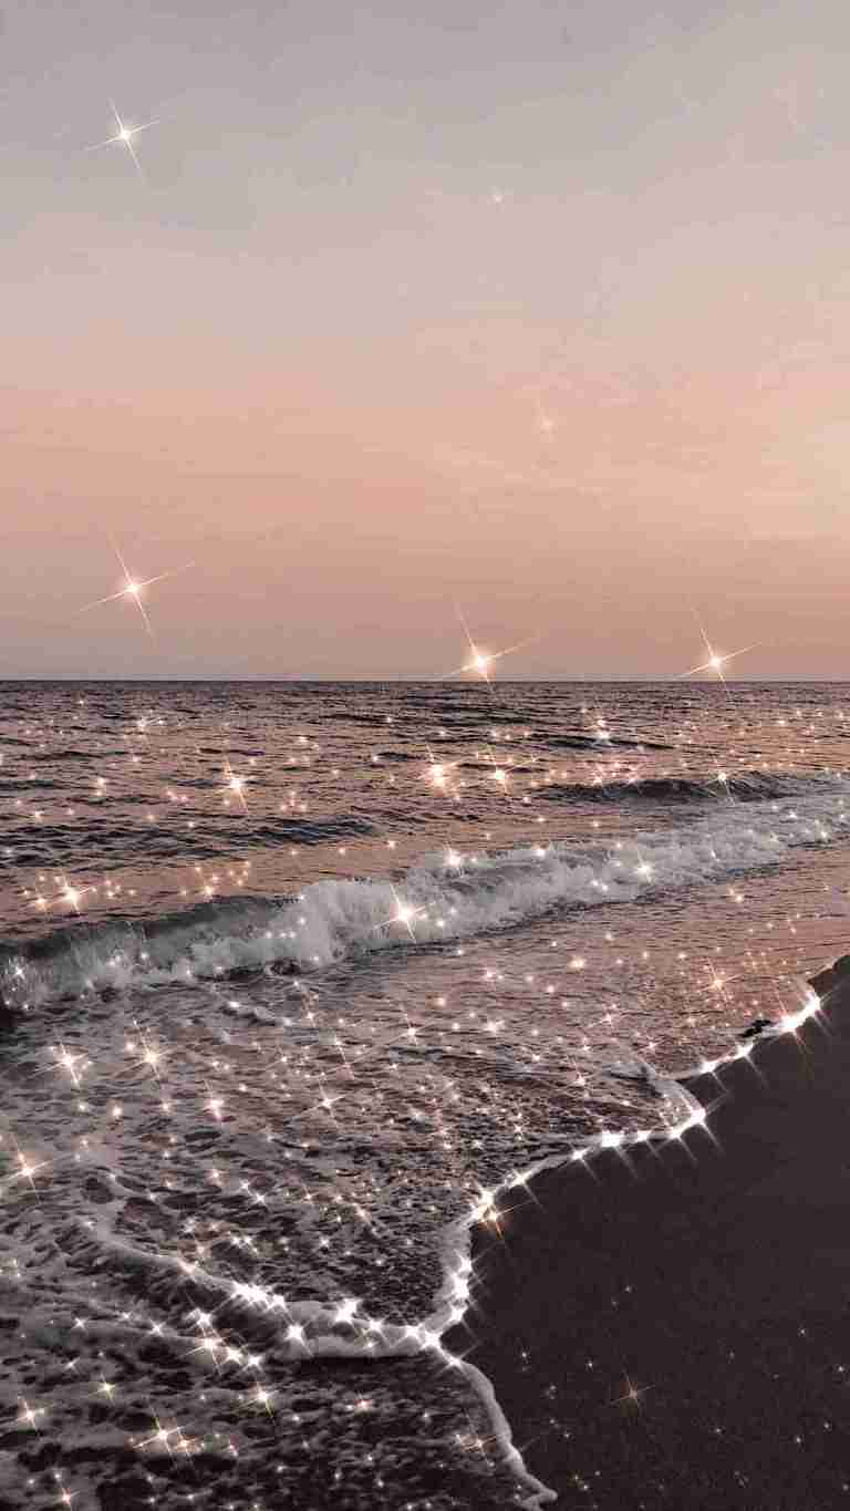 The ocean at night with stars in it - Glitter, ocean